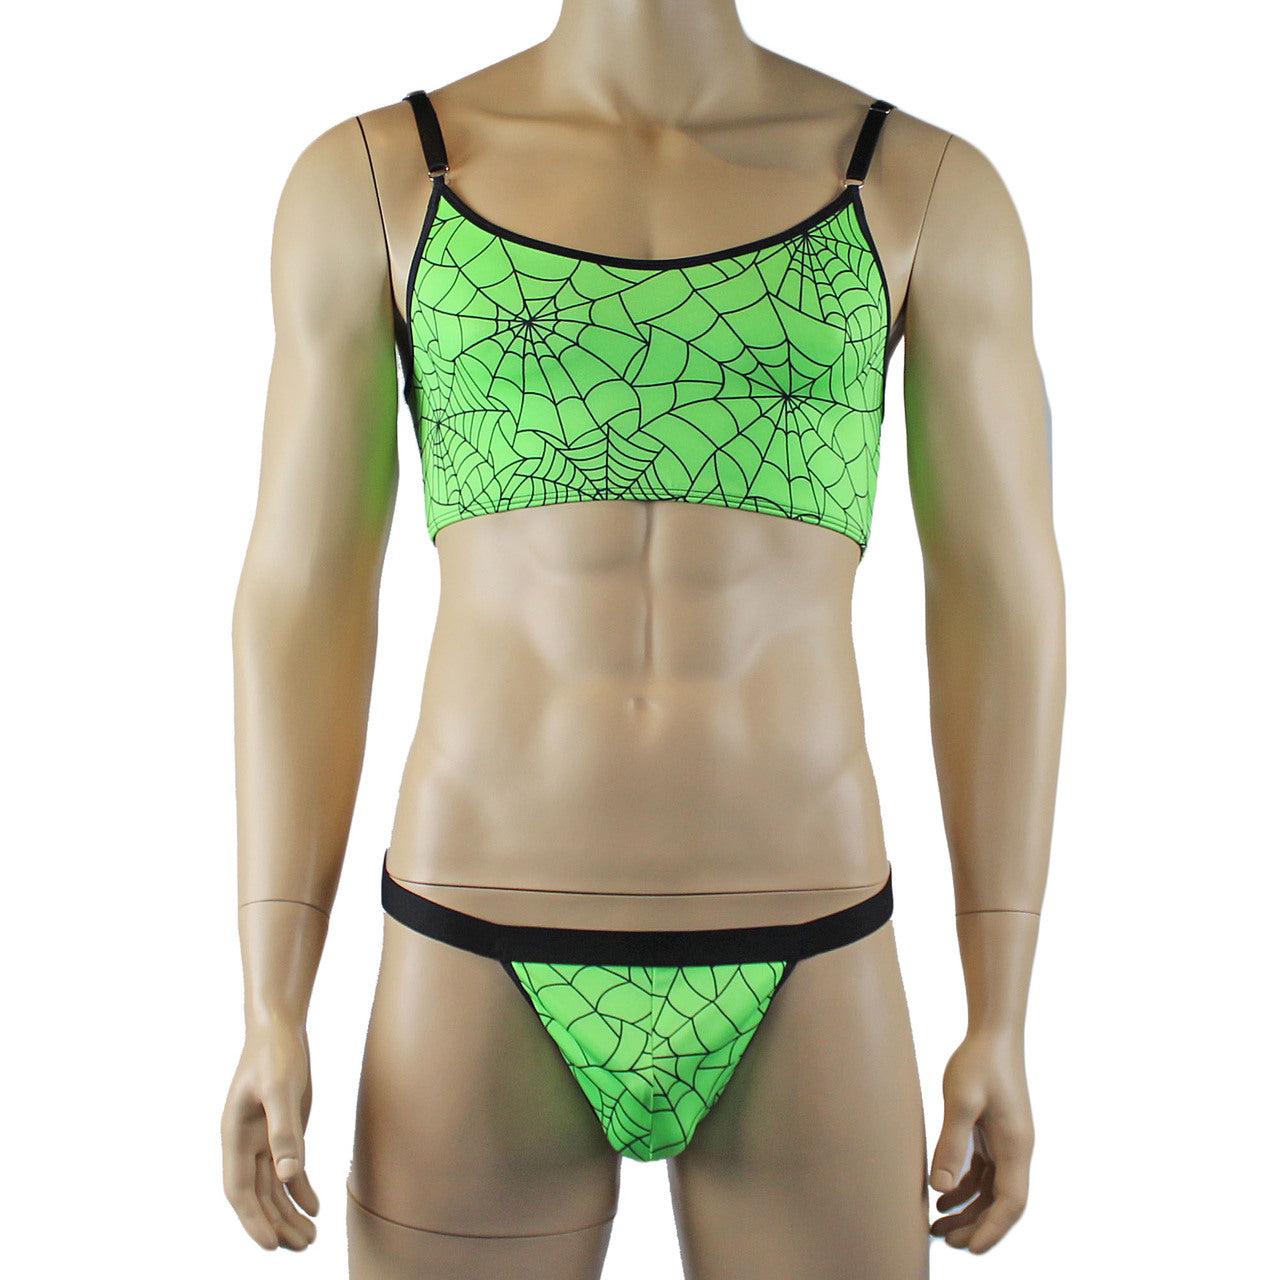 Mens Spider Web Camisole Bra Top & Thong with Band Lime Green